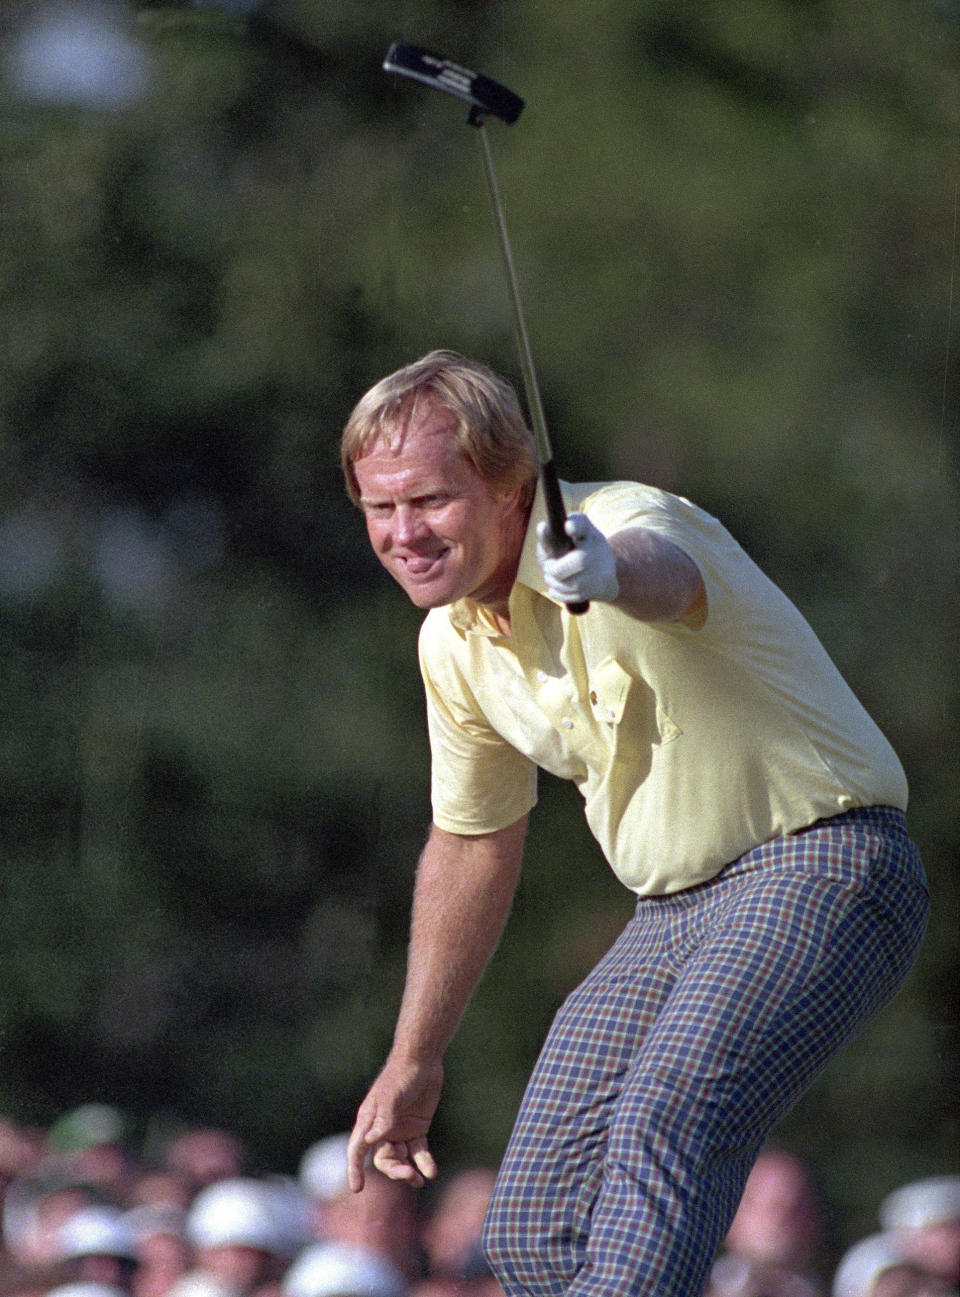 FILE - In this April 13, 1986, file photo, Jack Nicklaus watches his shot go for a birdie, giving him the lead and the title on the 17th hole at the Masters golf tournament in Augusta, Ga. There is no Masters this year because of the COVID-19 pandemic, the first time there is no golf at Augusta National the first full week in April since the end of World War II in 1945. (AP Photo/Joe Benton, File)